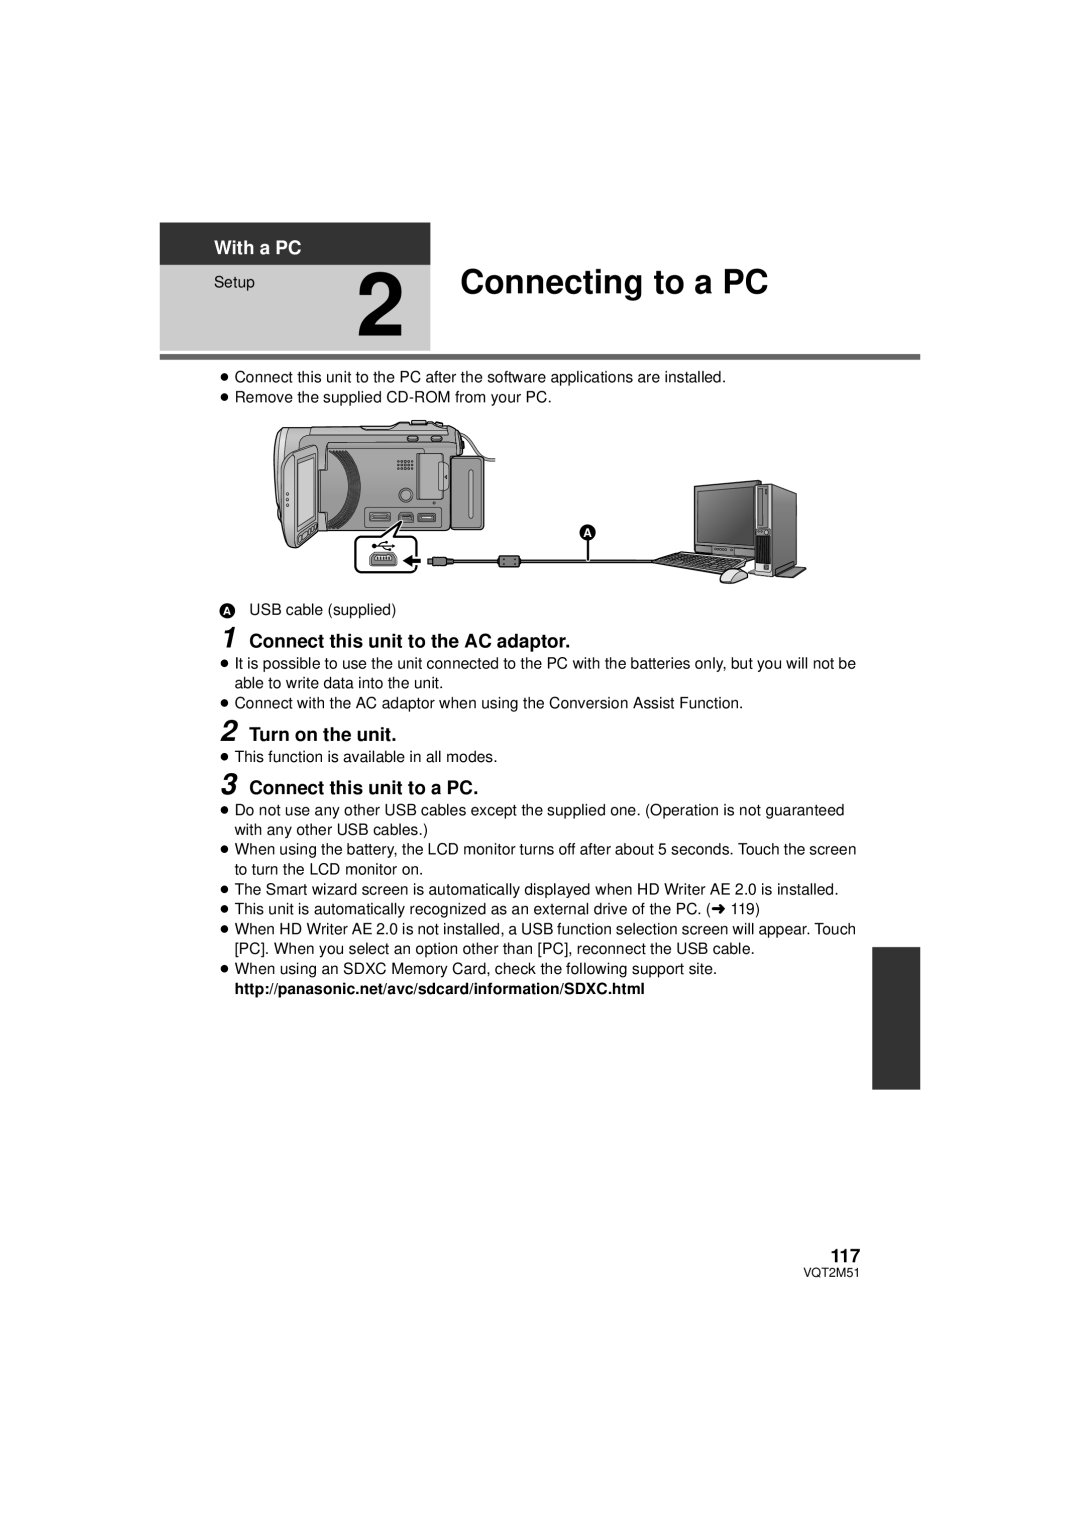 Panasonic HDC-TM60P/PC, HDC-SD60P/PC Connecting to a PC, Connect this unit to the AC adaptor, Turn on the unit, With a PC 